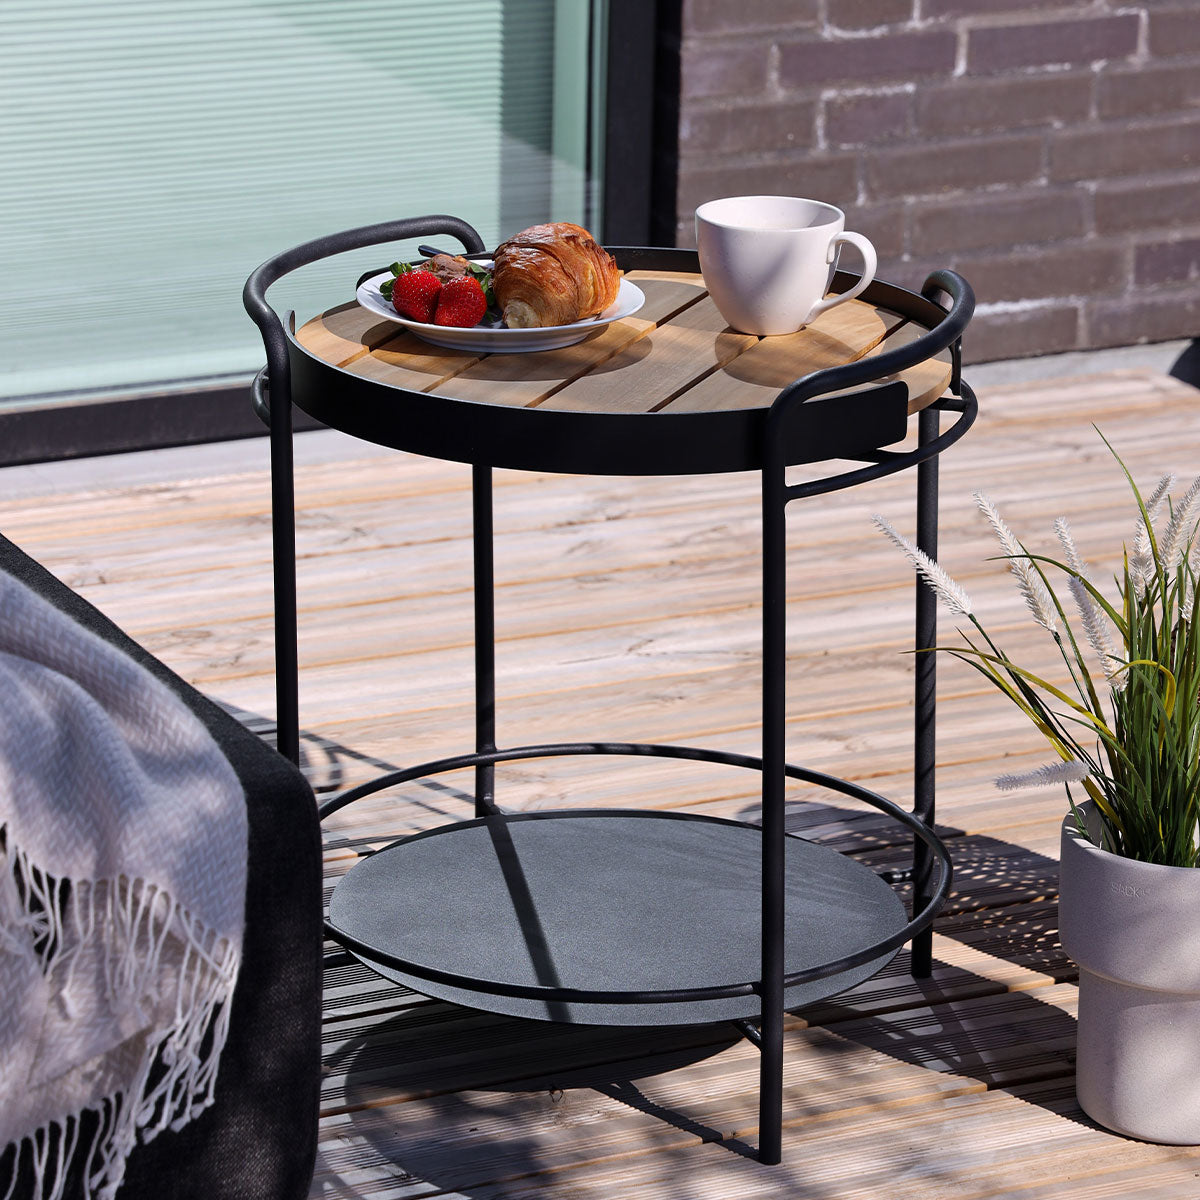 Patio Serving Table - Ø55 [Contract]